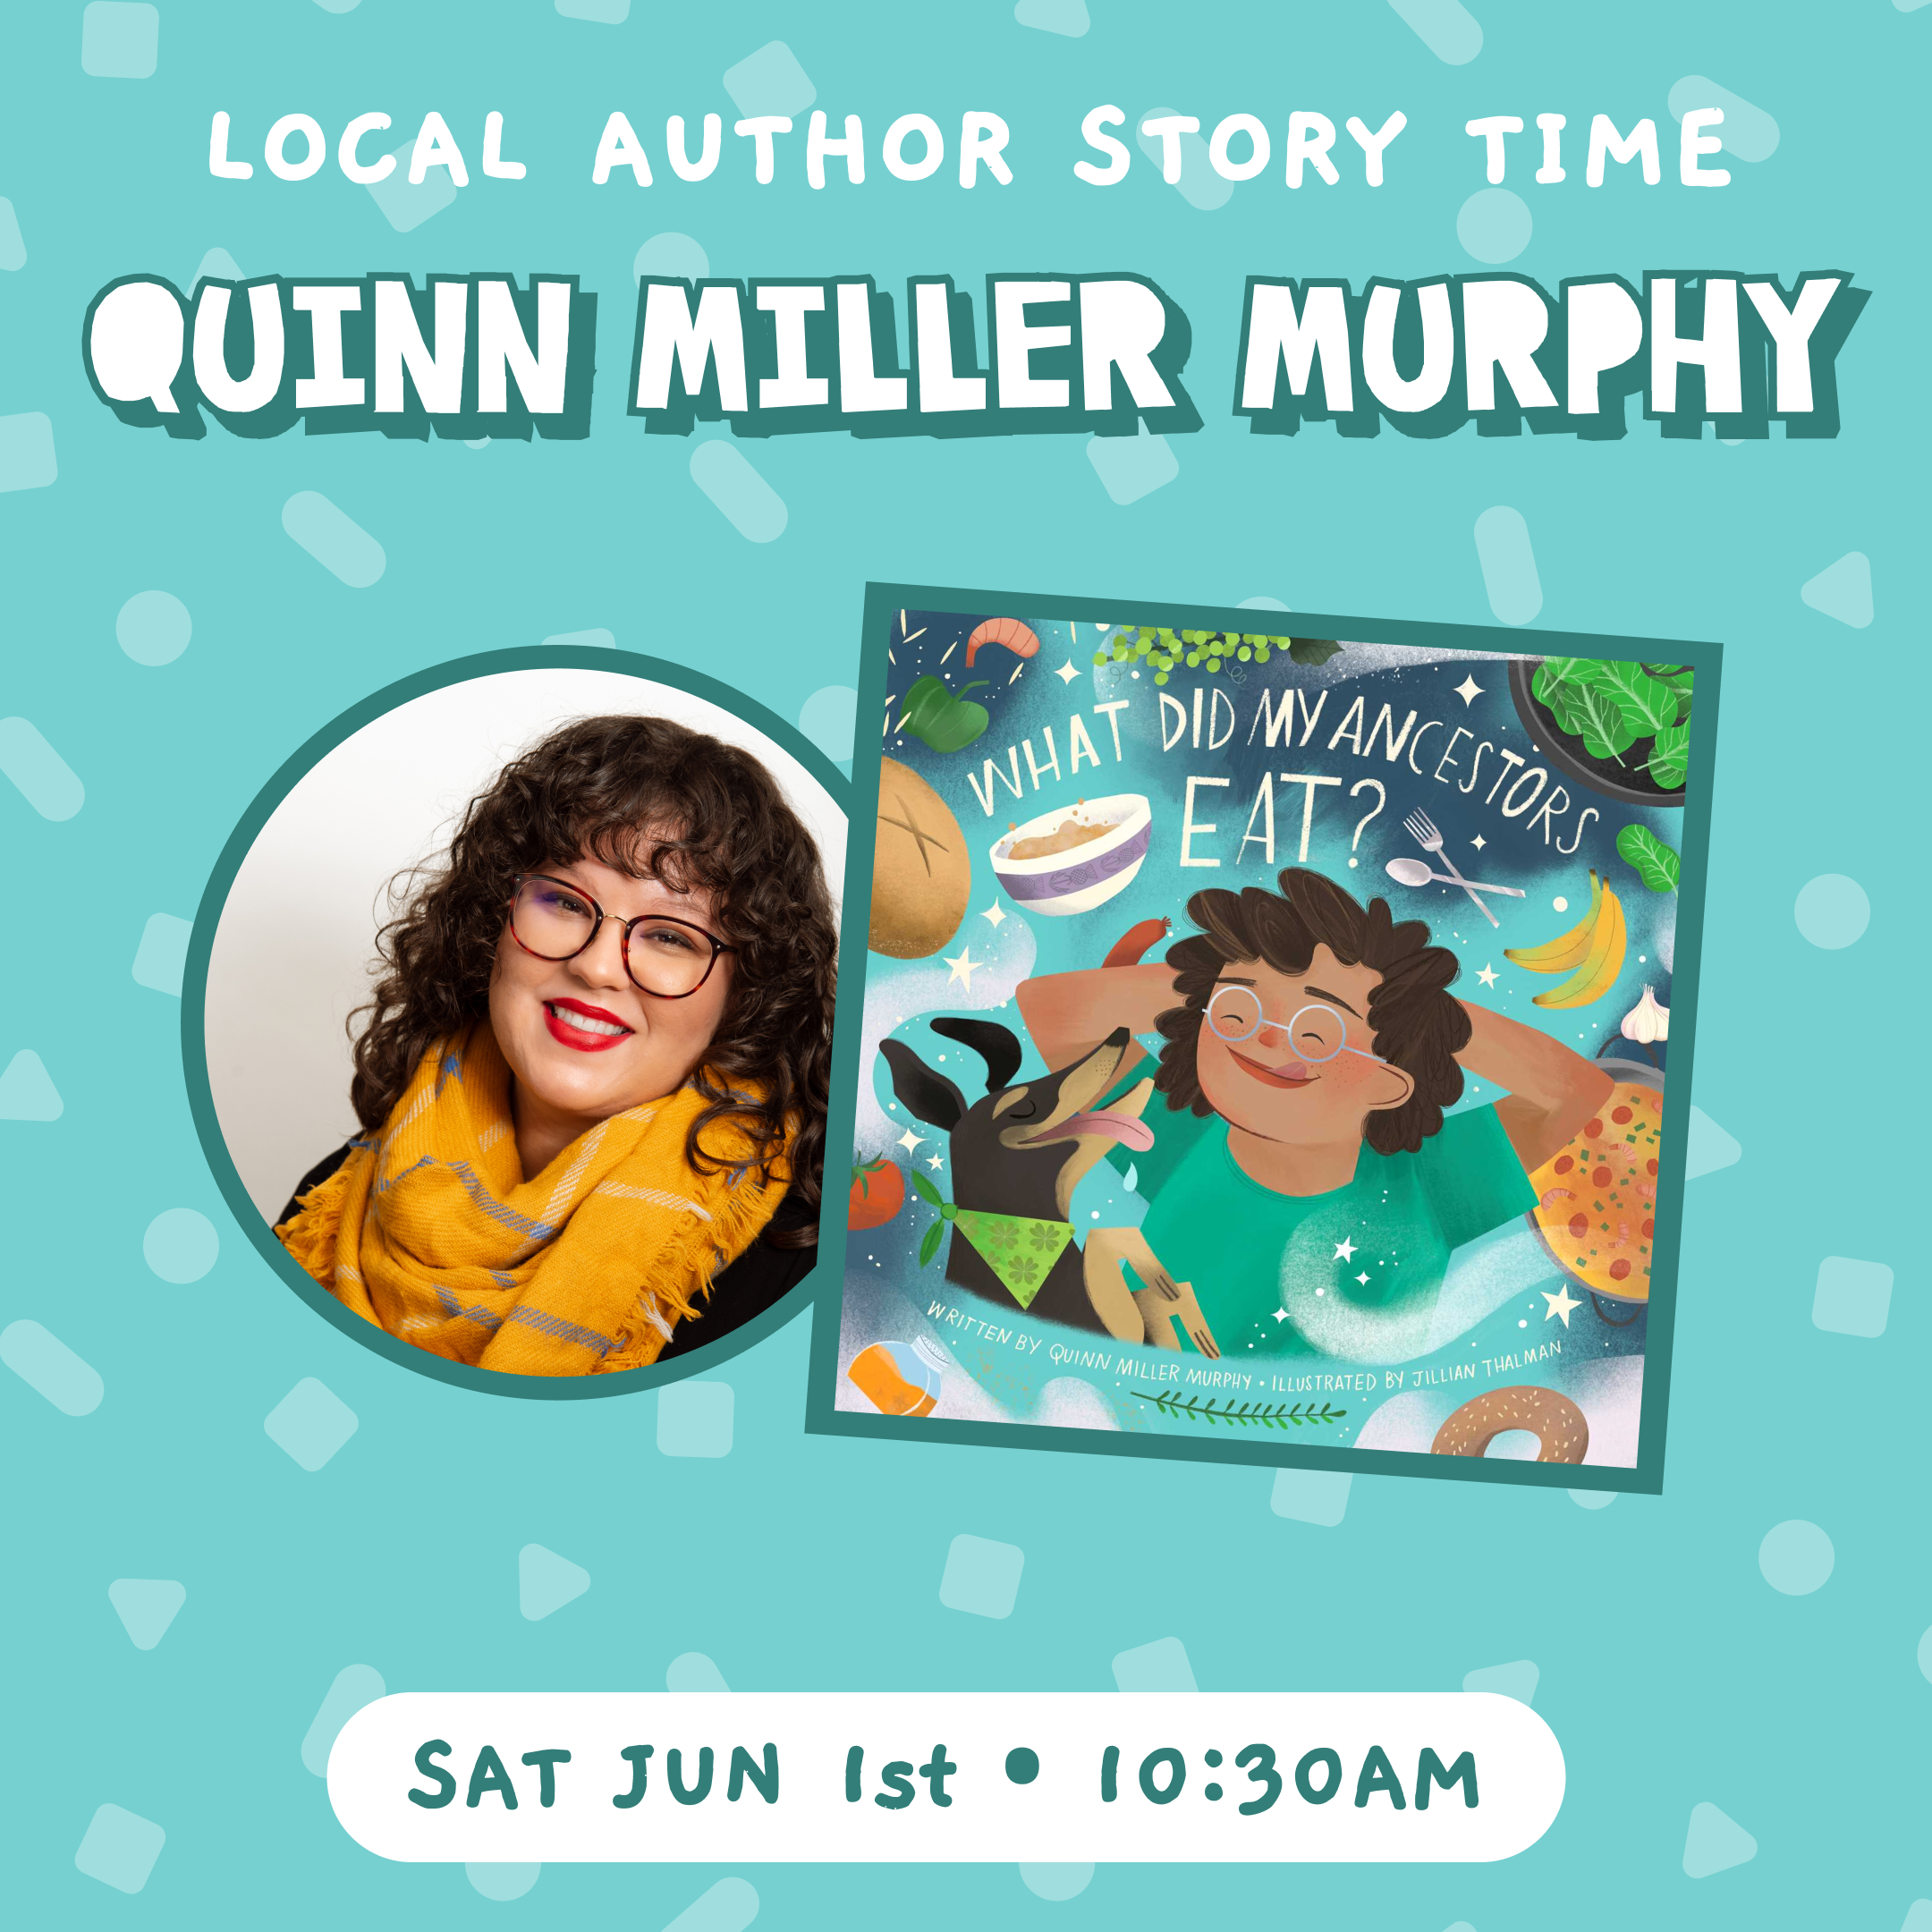 What Did My Ancestors Eat? Author Story Time with Quinn Miller